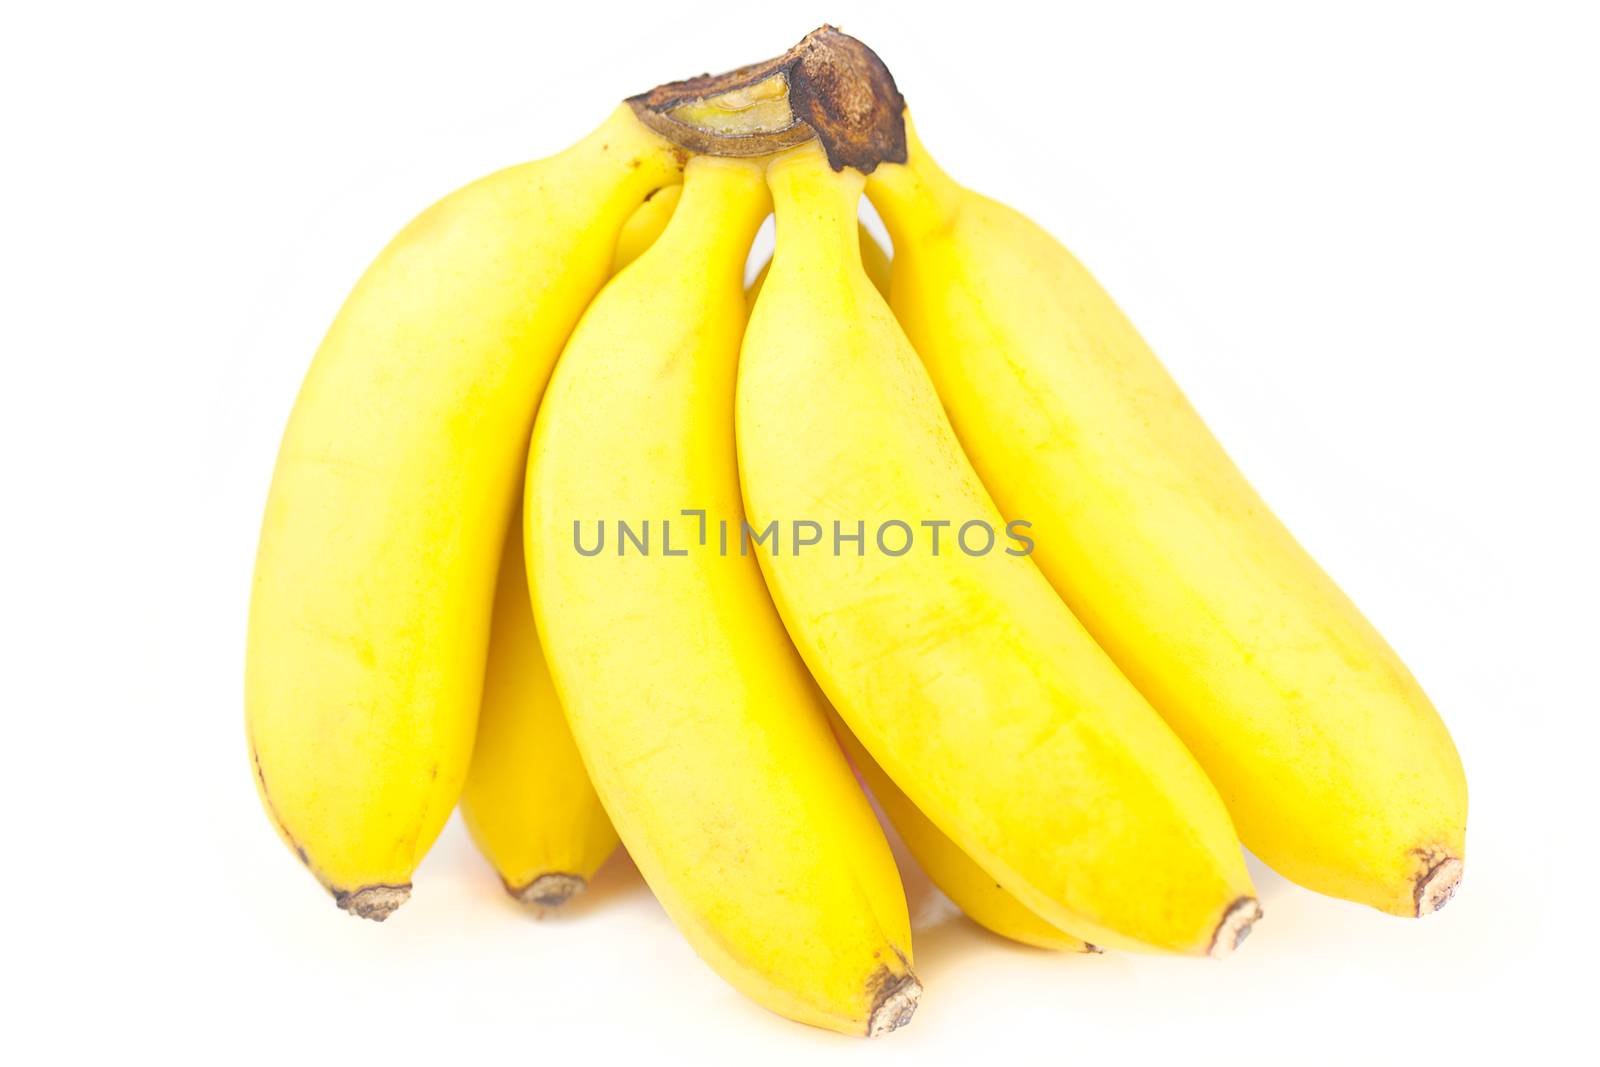 bunch of bananas isolated on white by jannyjus